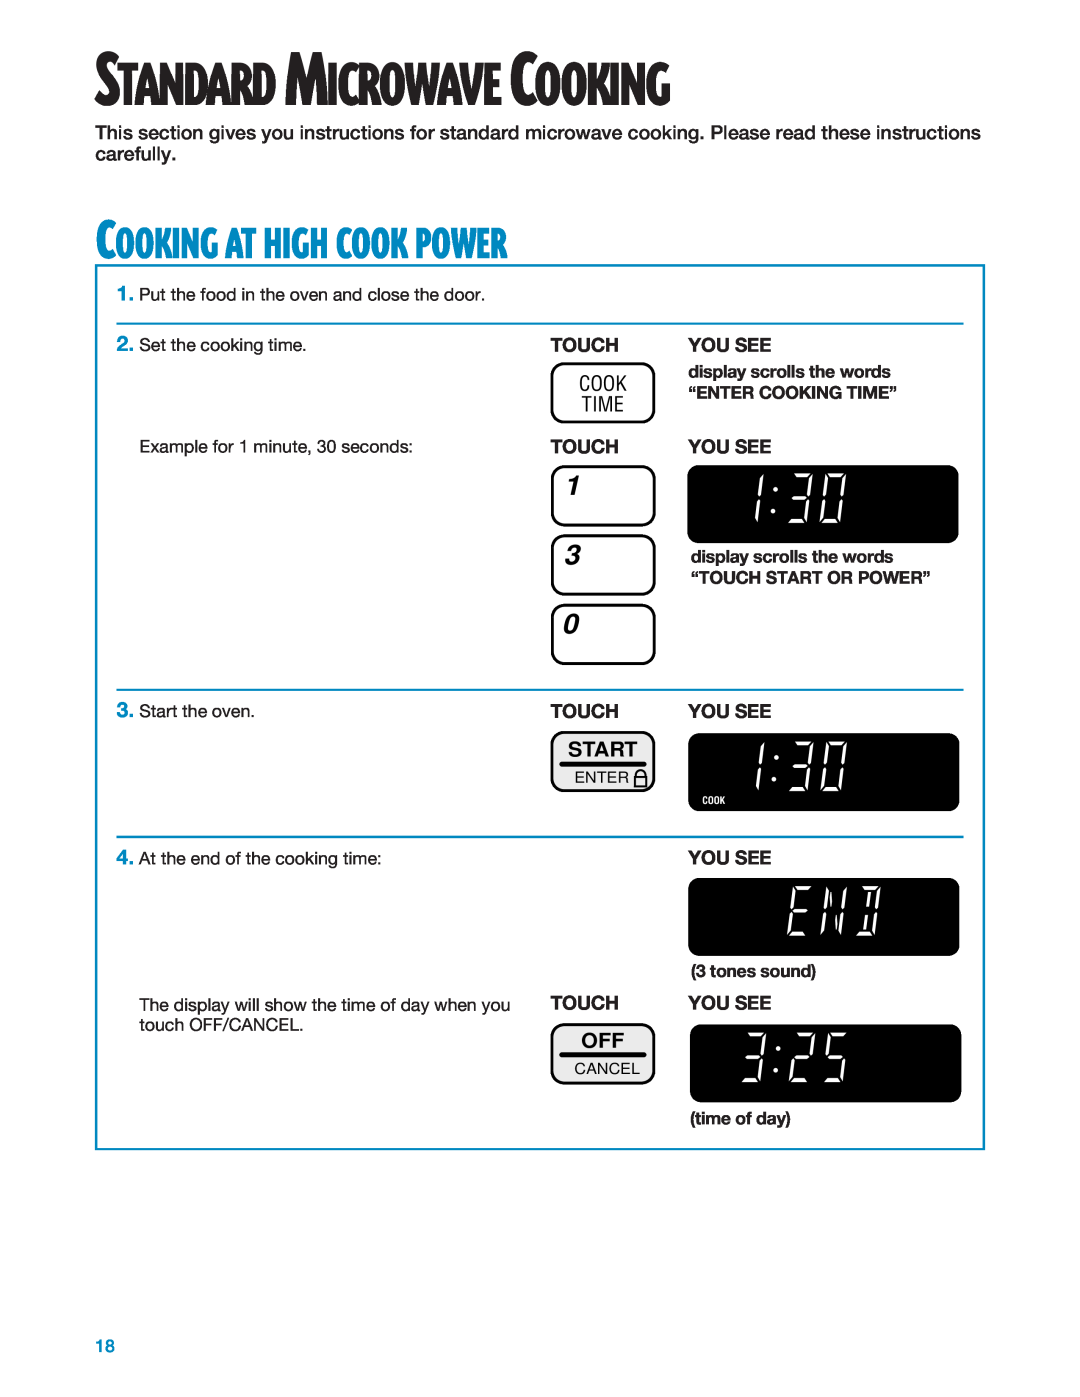 Whirlpool MT1135SG Cooking At High Cook Power, Standard Microwave Cooking, Touch, You See, Time, Start, Enter, Cancel 